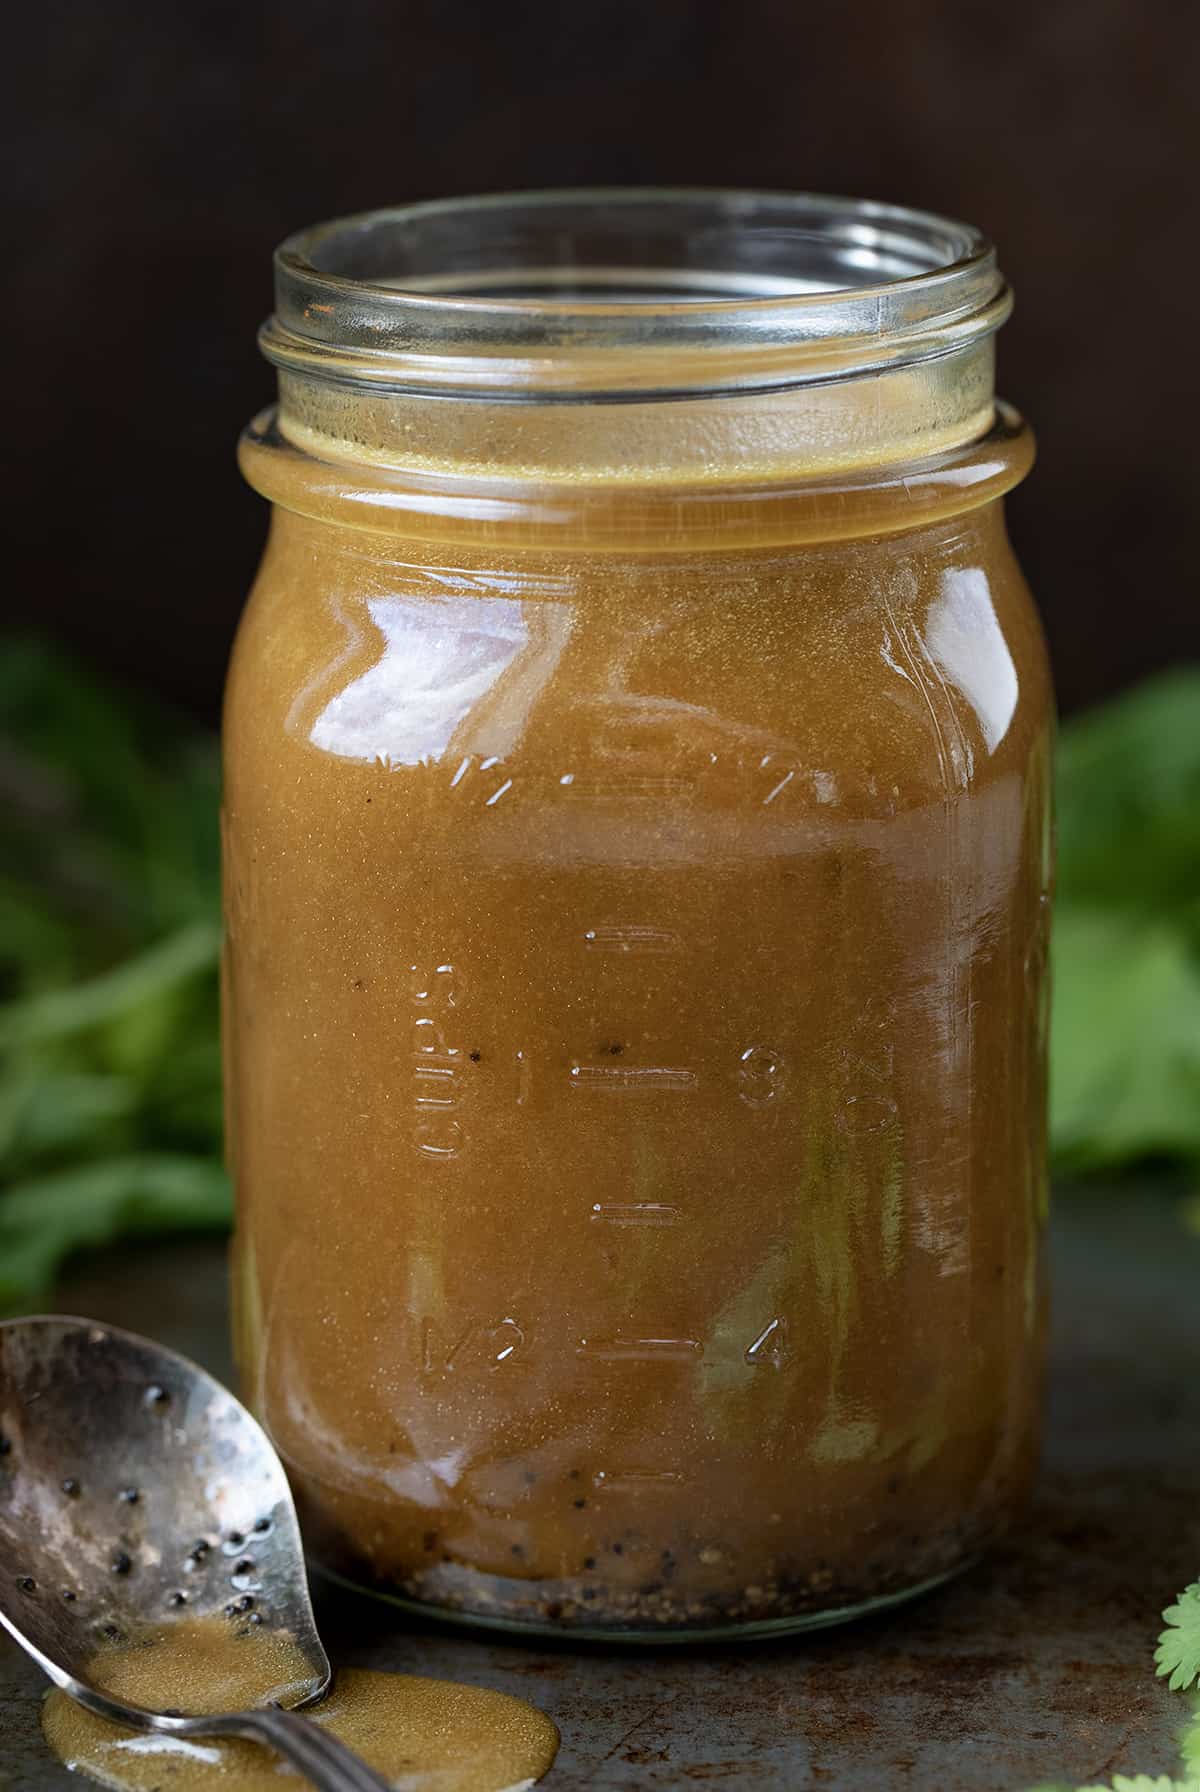 Jar of Creamy Balsamic Vinaigrette with a Spoon Next to It.